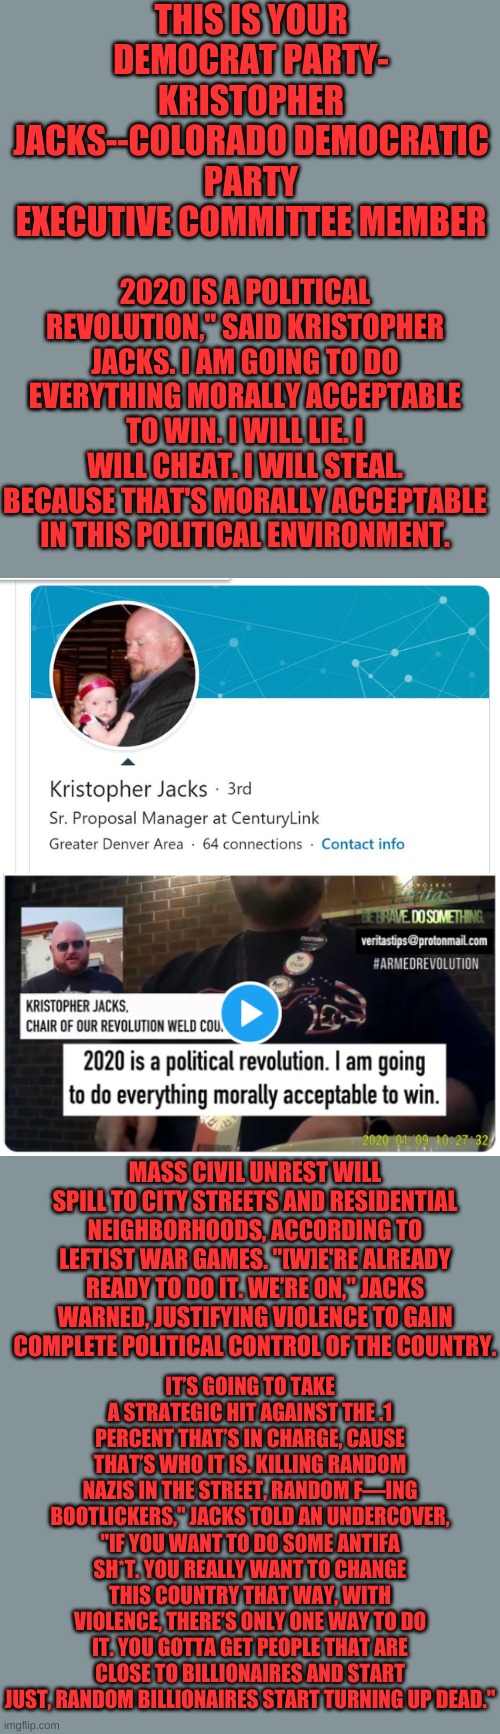 If you vote for Democrats, you own this, this is your Democrat Party. Wake up. Killing random people in the streets is yours. | THIS IS YOUR DEMOCRAT PARTY- KRISTOPHER JACKS--COLORADO DEMOCRATIC PARTY EXECUTIVE COMMITTEE MEMBER; 2020 IS A POLITICAL REVOLUTION," SAID KRISTOPHER JACKS. I AM GOING TO DO EVERYTHING MORALLY ACCEPTABLE TO WIN. I WILL LIE. I WILL CHEAT. I WILL STEAL. BECAUSE THAT'S MORALLY ACCEPTABLE IN THIS POLITICAL ENVIRONMENT. MASS CIVIL UNREST WILL SPILL TO CITY STREETS AND RESIDENTIAL NEIGHBORHOODS, ACCORDING TO LEFTIST WAR GAMES. "[W]E'RE ALREADY READY TO DO IT. WE’RE ON," JACKS WARNED, JUSTIFYING VIOLENCE TO GAIN COMPLETE POLITICAL CONTROL OF THE COUNTRY. IT’S GOING TO TAKE A STRATEGIC HIT AGAINST THE .1 PERCENT THAT’S IN CHARGE, CAUSE THAT’S WHO IT IS. KILLING RANDOM NAZIS IN THE STREET, RANDOM F—ING BOOTLICKERS," JACKS TOLD AN UNDERCOVER, "IF YOU WANT TO DO SOME ANTIFA SH*T. YOU REALLY WANT TO CHANGE THIS COUNTRY THAT WAY, WITH VIOLENCE, THERE’S ONLY ONE WAY TO DO IT. YOU GOTTA GET PEOPLE THAT ARE CLOSE TO BILLIONAIRES AND START JUST, RANDOM BILLIONAIRES START TURNING UP DEAD." | image tagged in kristopher jacks,colorado democrat,democrat,hater | made w/ Imgflip meme maker